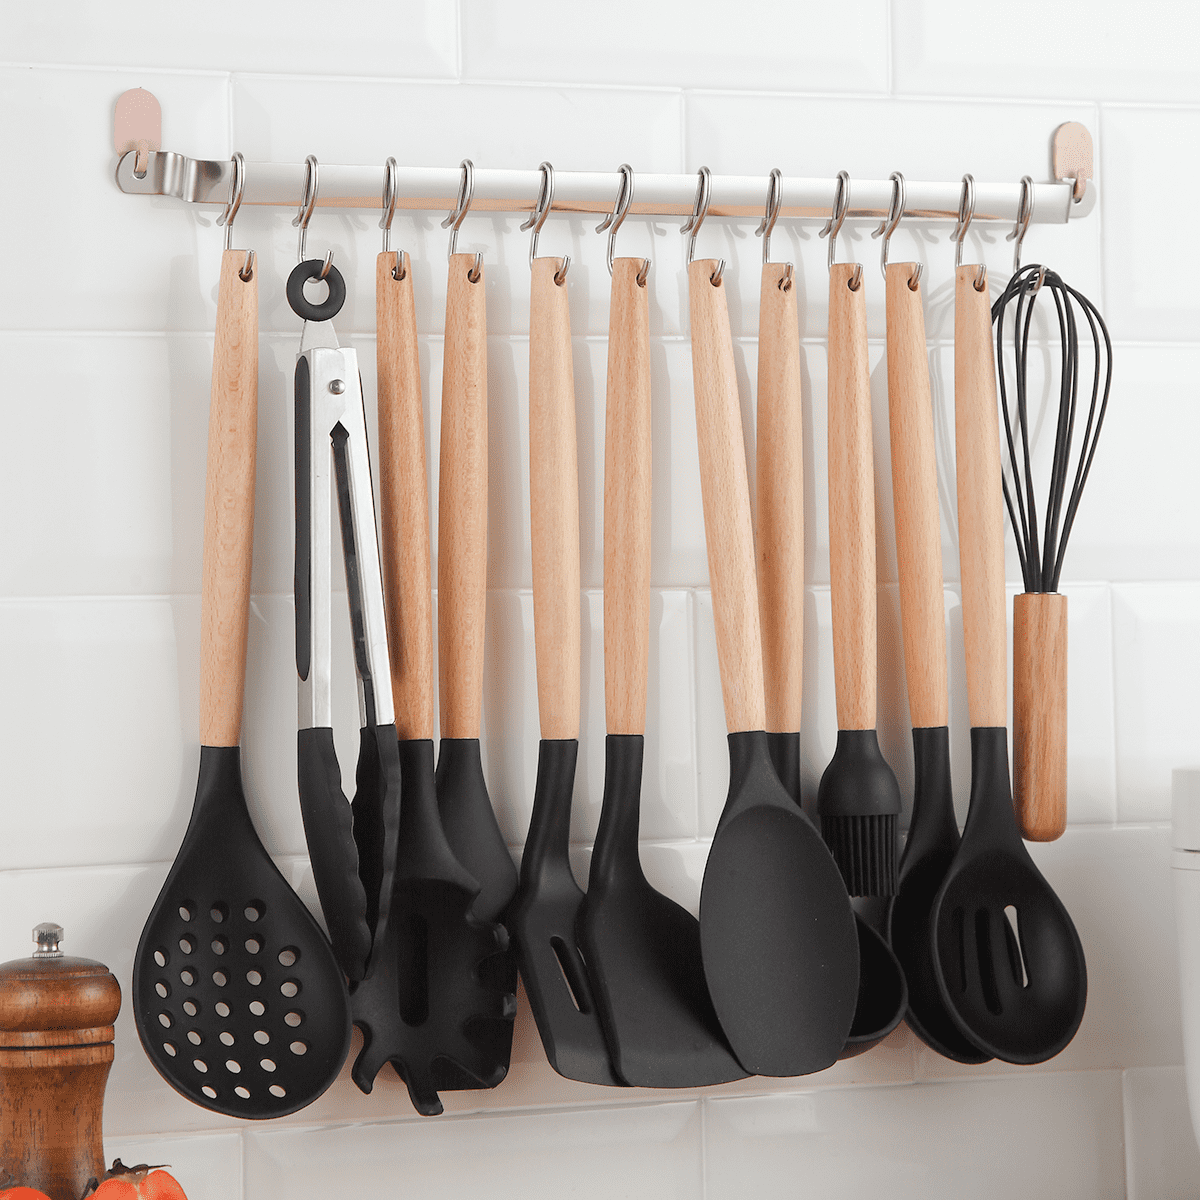 ReaNea Cooking Utensils Set Stainless Steel 37 Pieces Kitchen Utensils Set  Kitchen Tool Gadgets with Hooks for Hanging